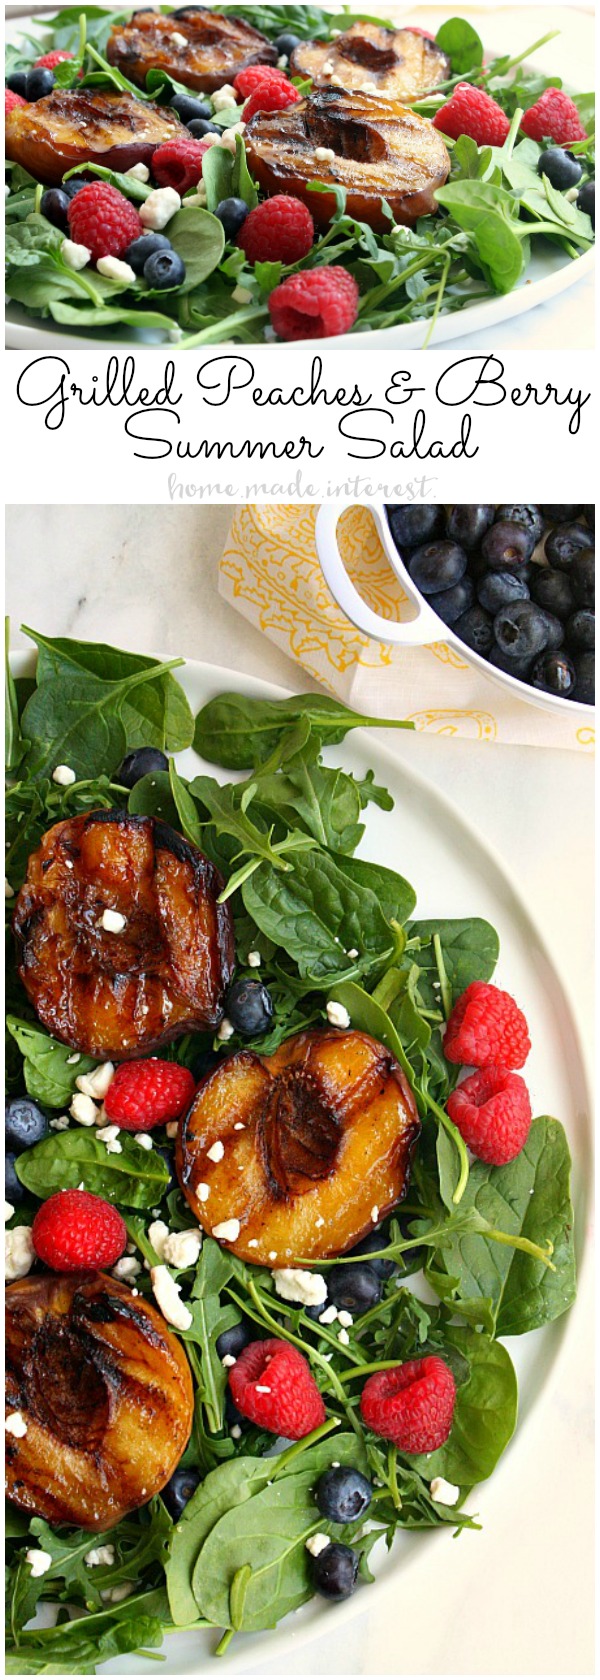 Salads don’t have to be boring! I made this summer salad with grilled peaches, fresh berries, crumbled goat cheese, and organic spinach and arugula. My special dressing brings it all together for a healthy summer dinner recipe that is super easy to make!